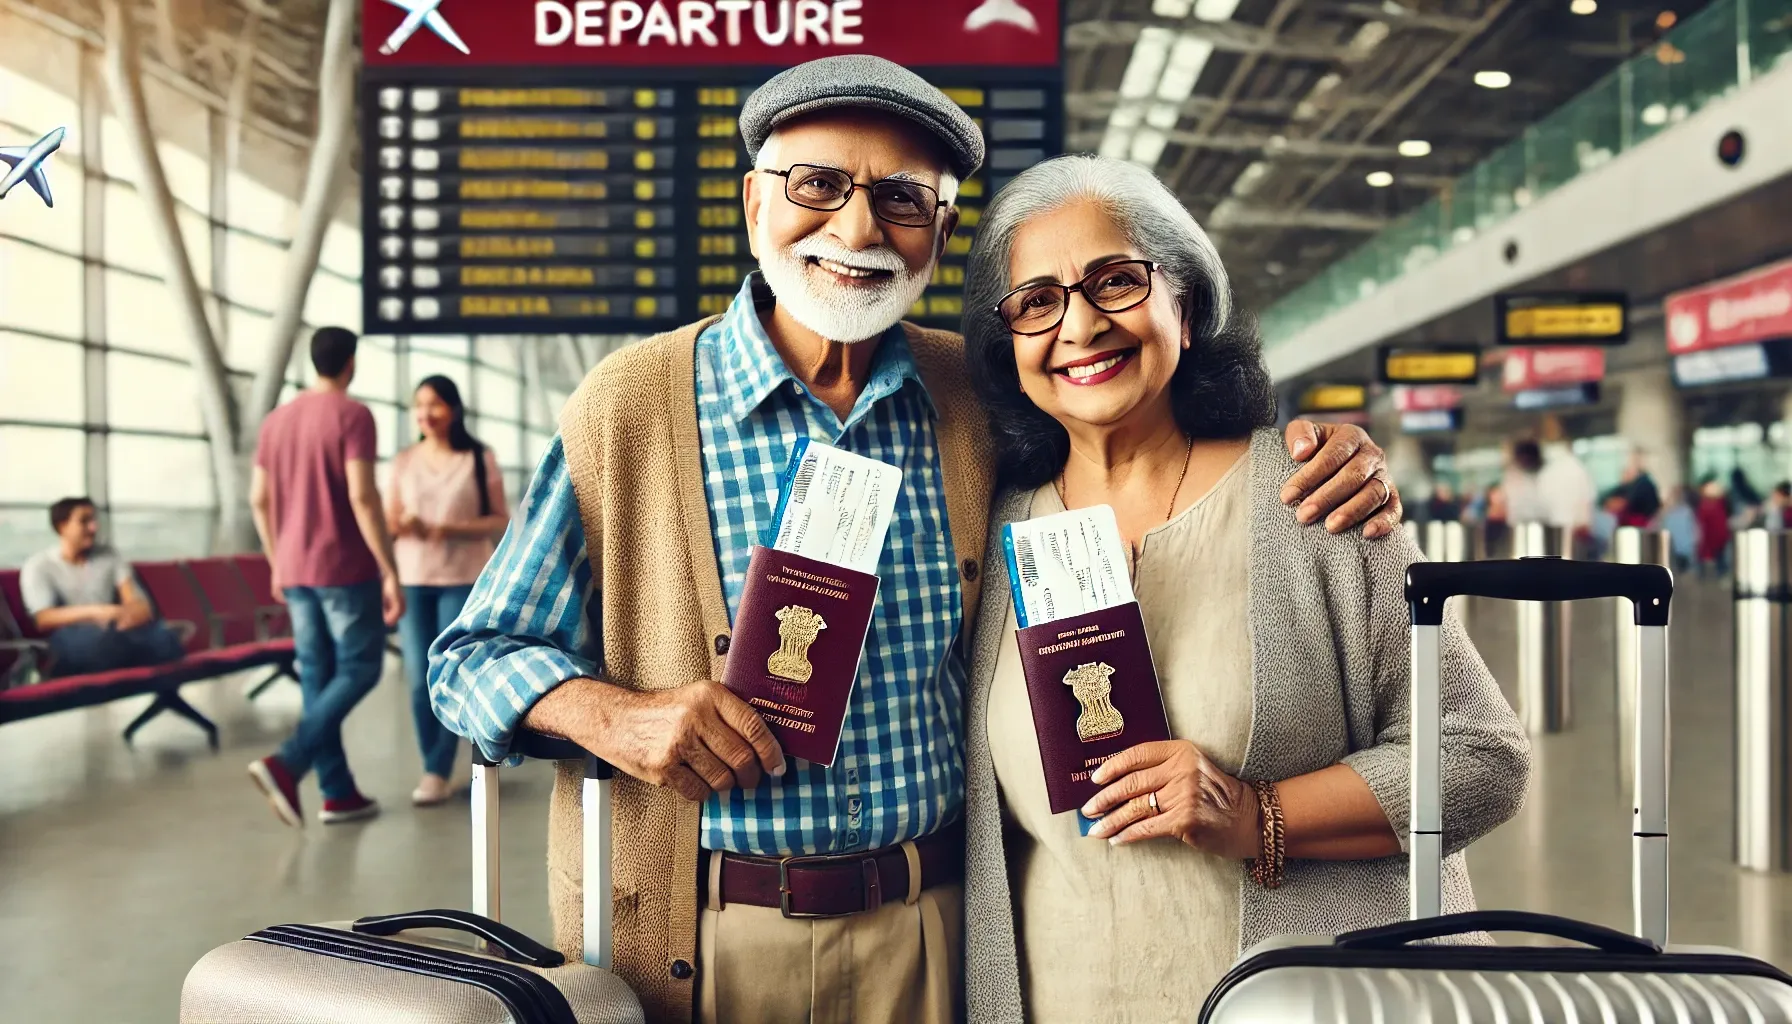 What Should My Parents Carry When Traveling to the